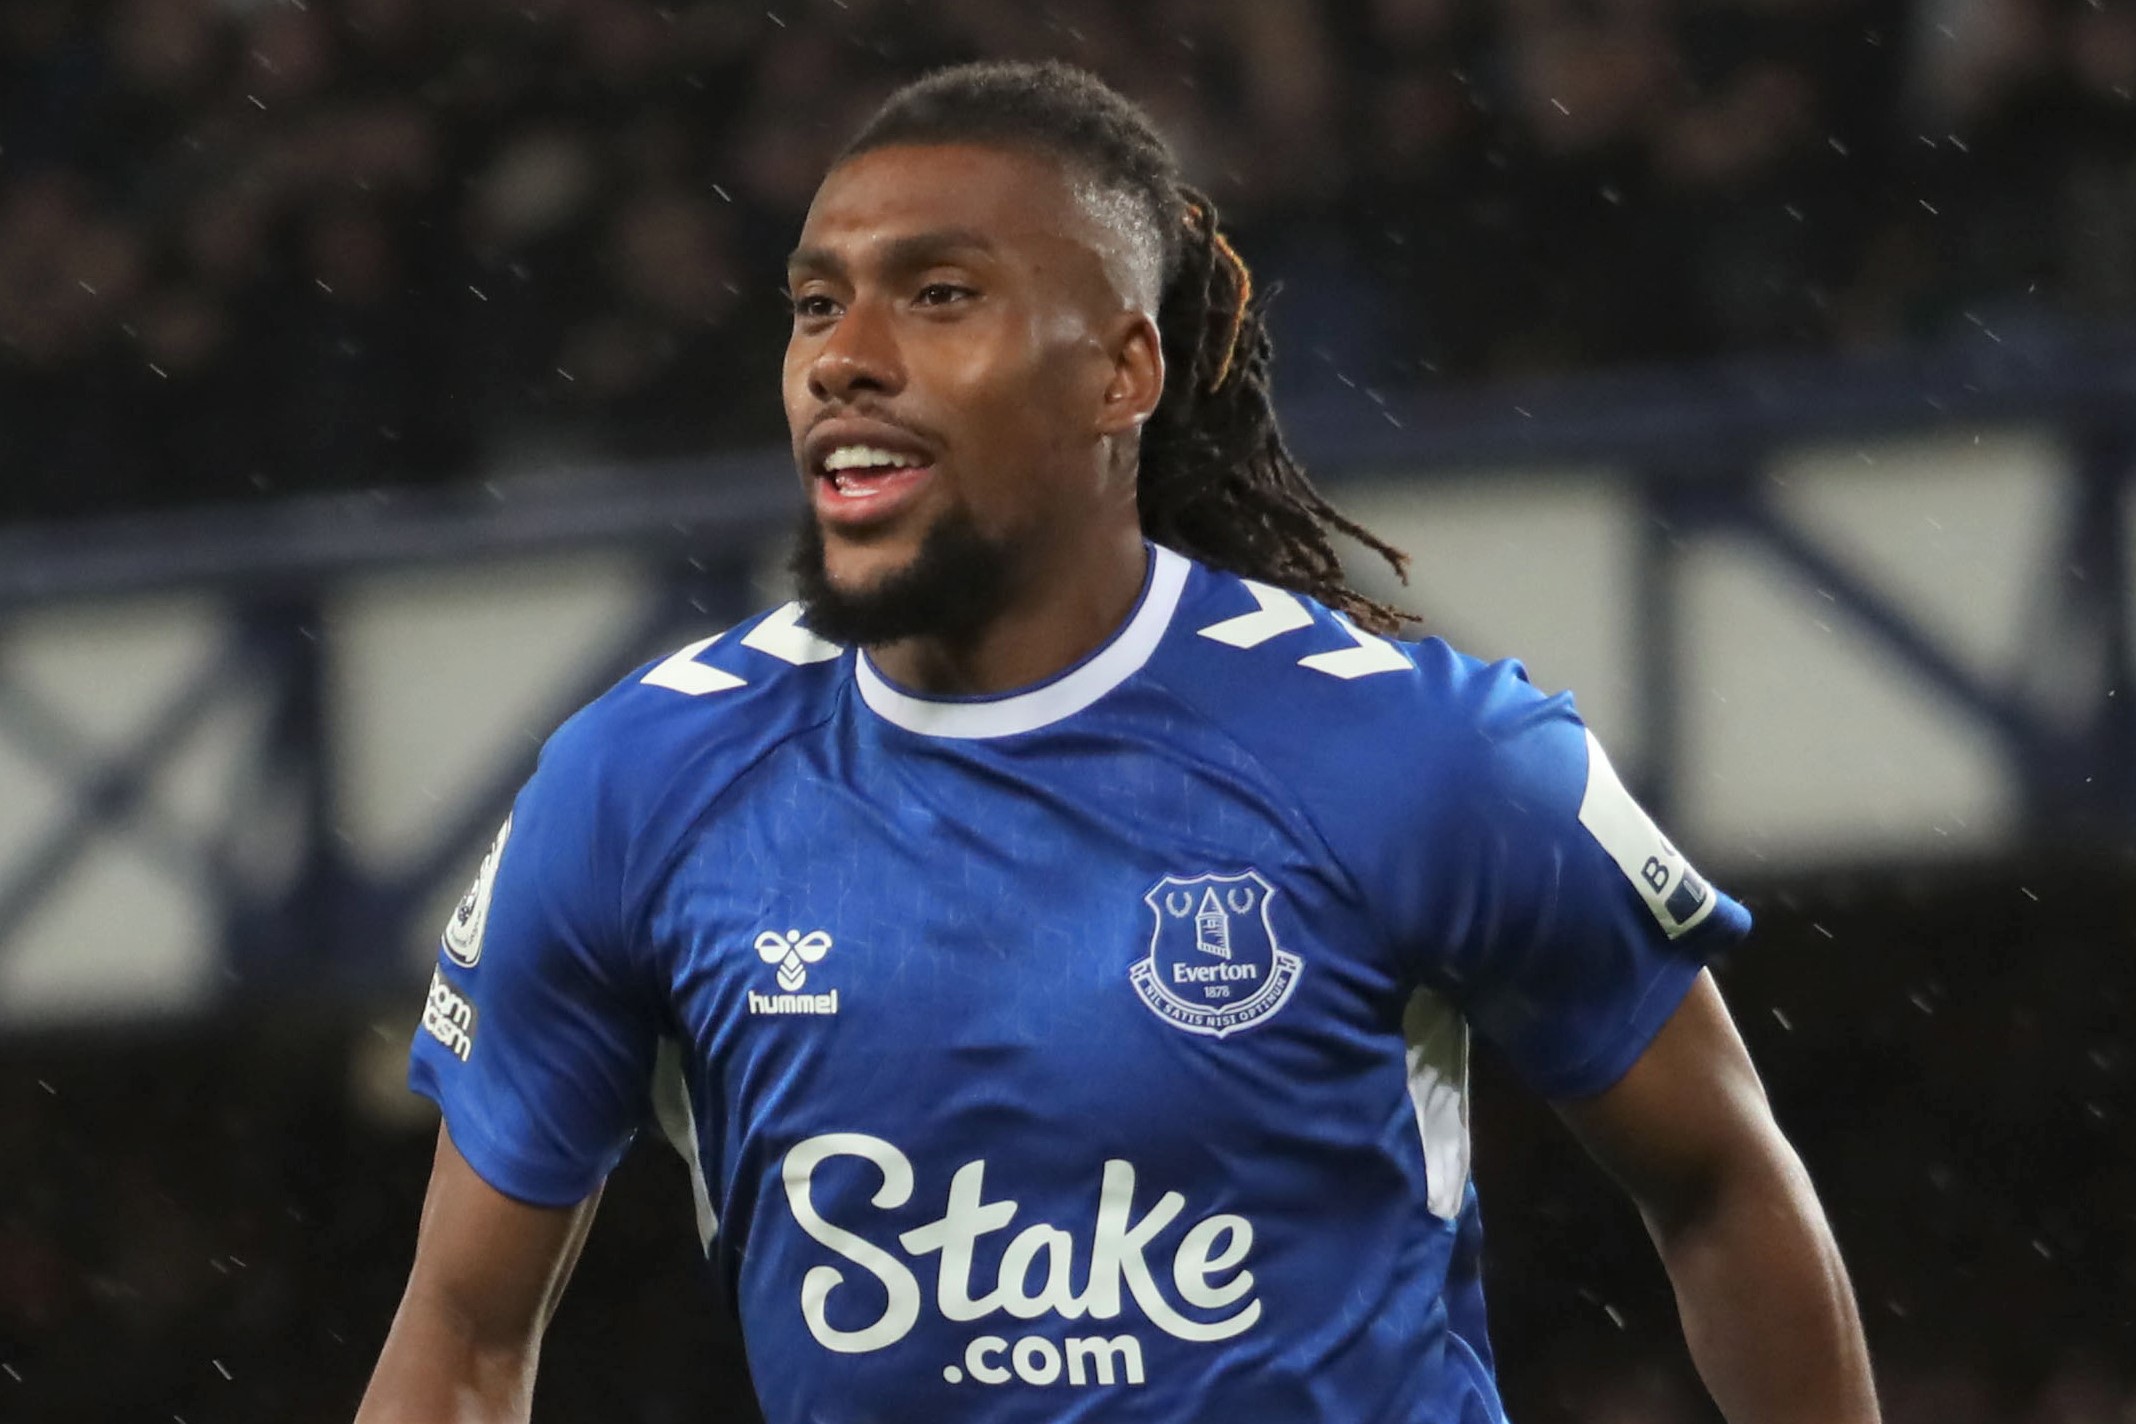 LIVERPOOL, ENGLAND - OCTOBER 09: Alex Iwobi of Everton  celebrates scoring their first goal during the Premier League match between Everton FC and Manchester United at Goodison Park on October 09, 2022 in Liverpool, England. (Photo by Tom Purslow/Manchester United via Getty Images)